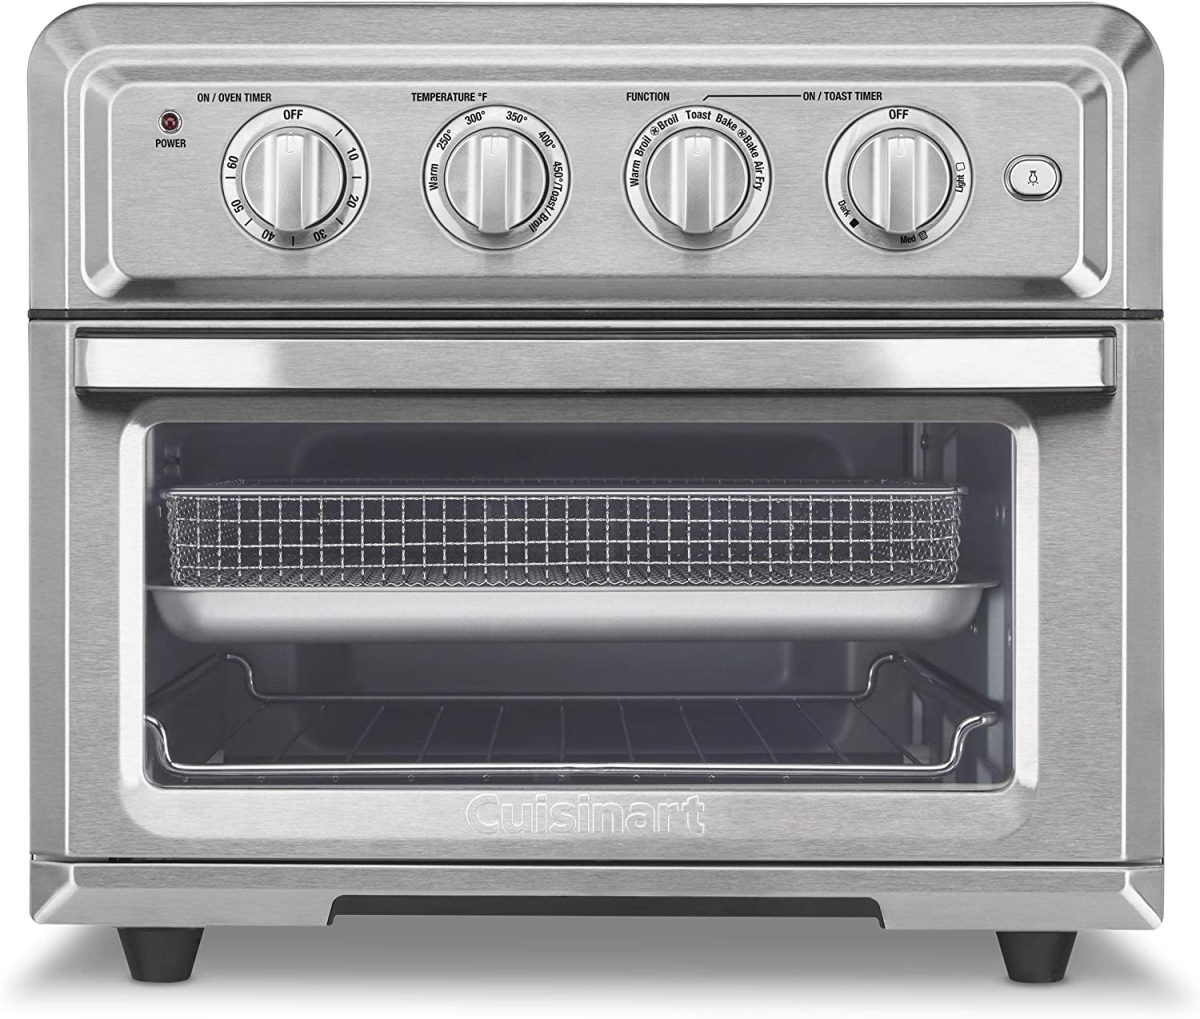 Cuisinart AirFryer Toaster Oven Review